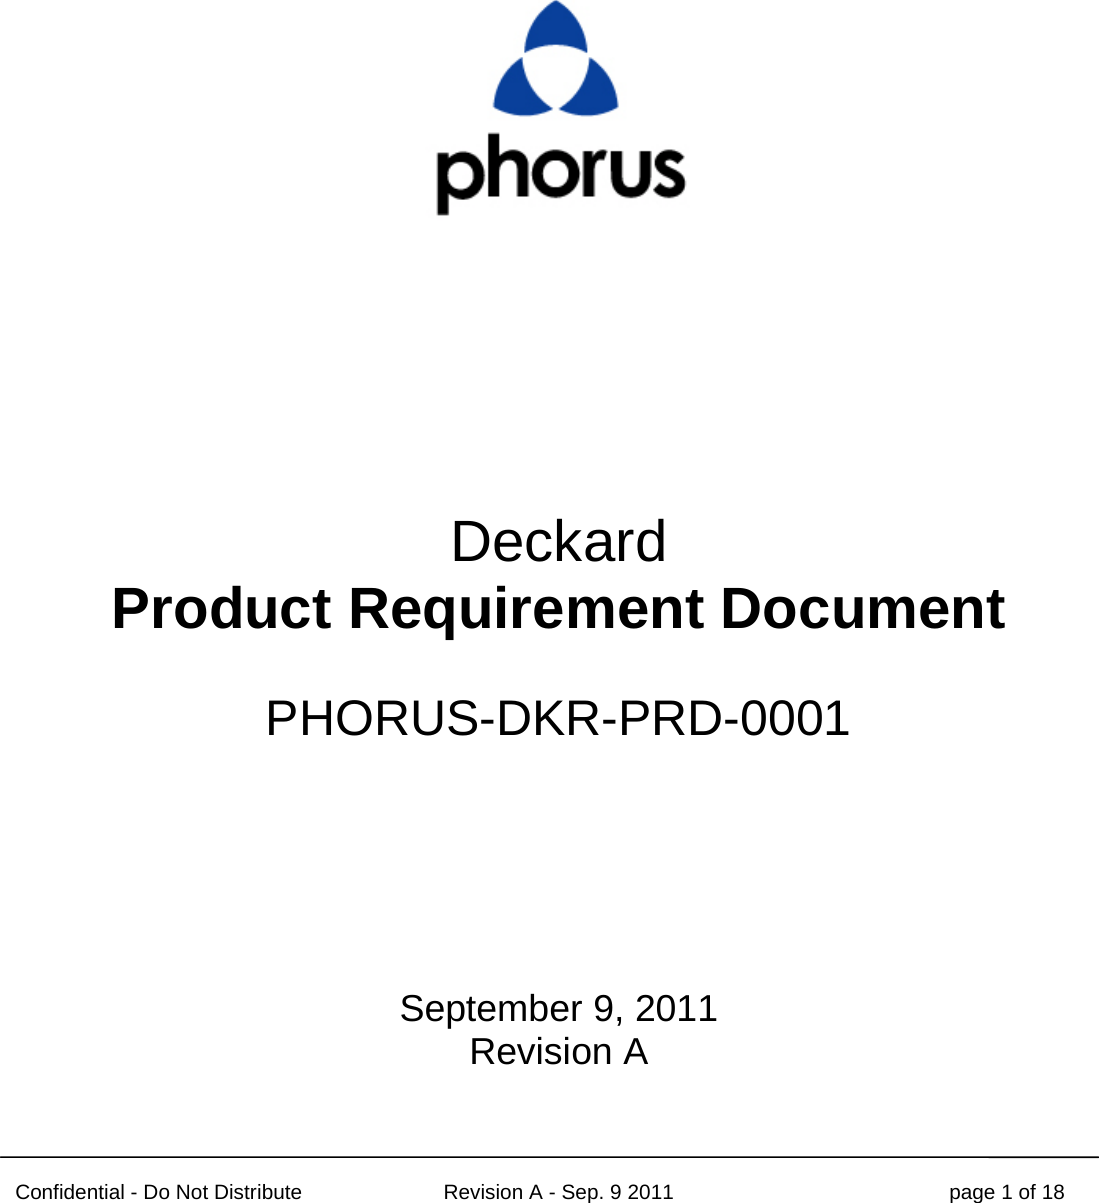 Confidential - Do Not Distribute Revision A - Sep. 9 2011 page 1 of 18          Deckard Product Requirement Document  PHORUS-DKR-PRD-0001      September 9, 2011 Revision A  